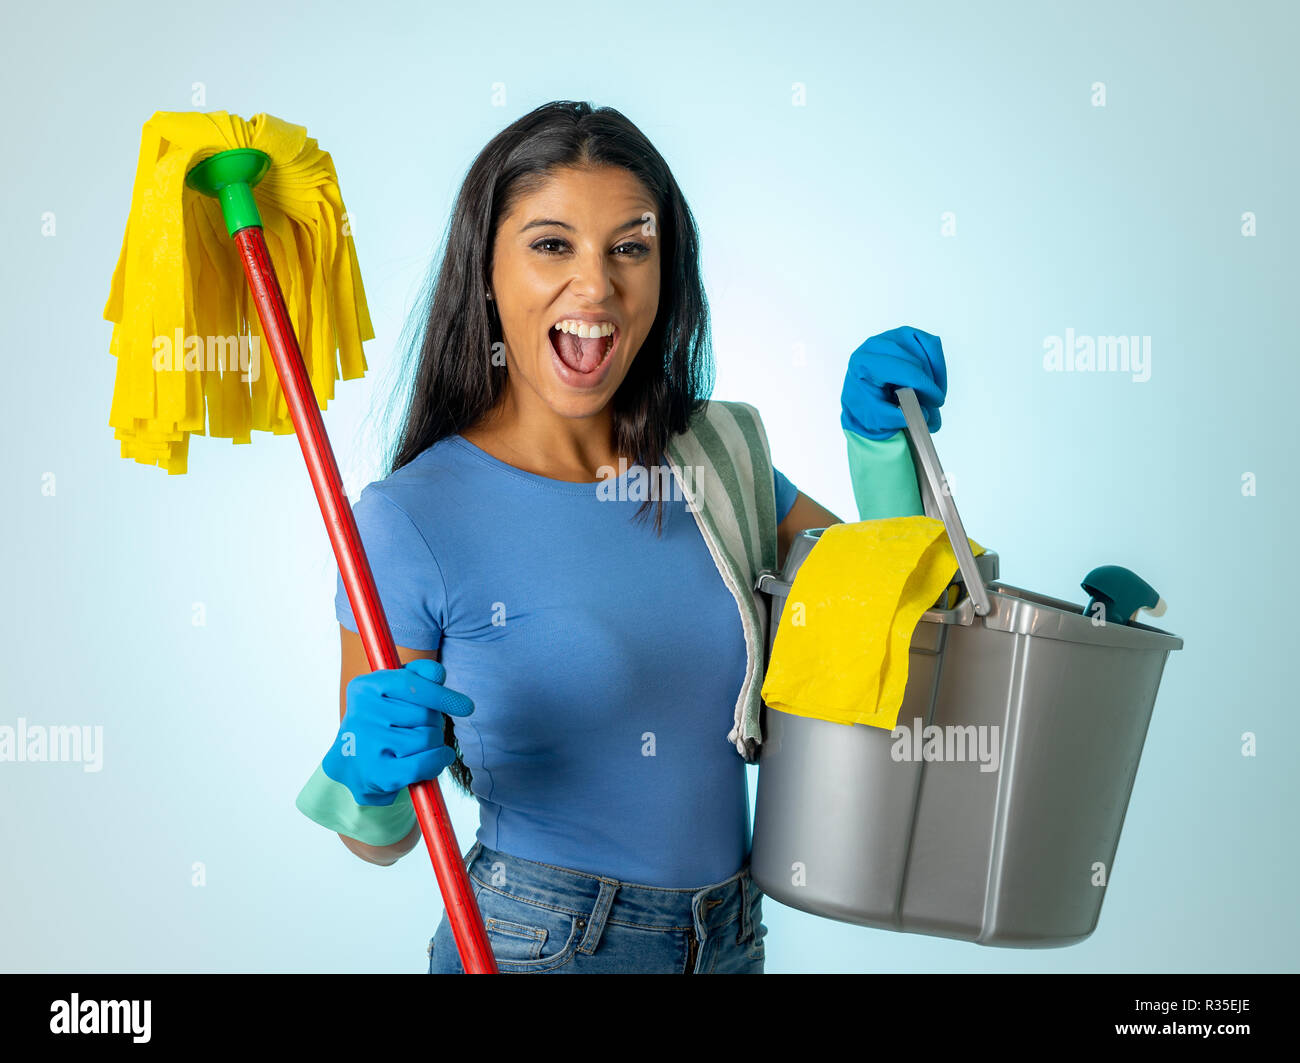 Free Photo  Cleaning concept. young woman holding cleaning tools